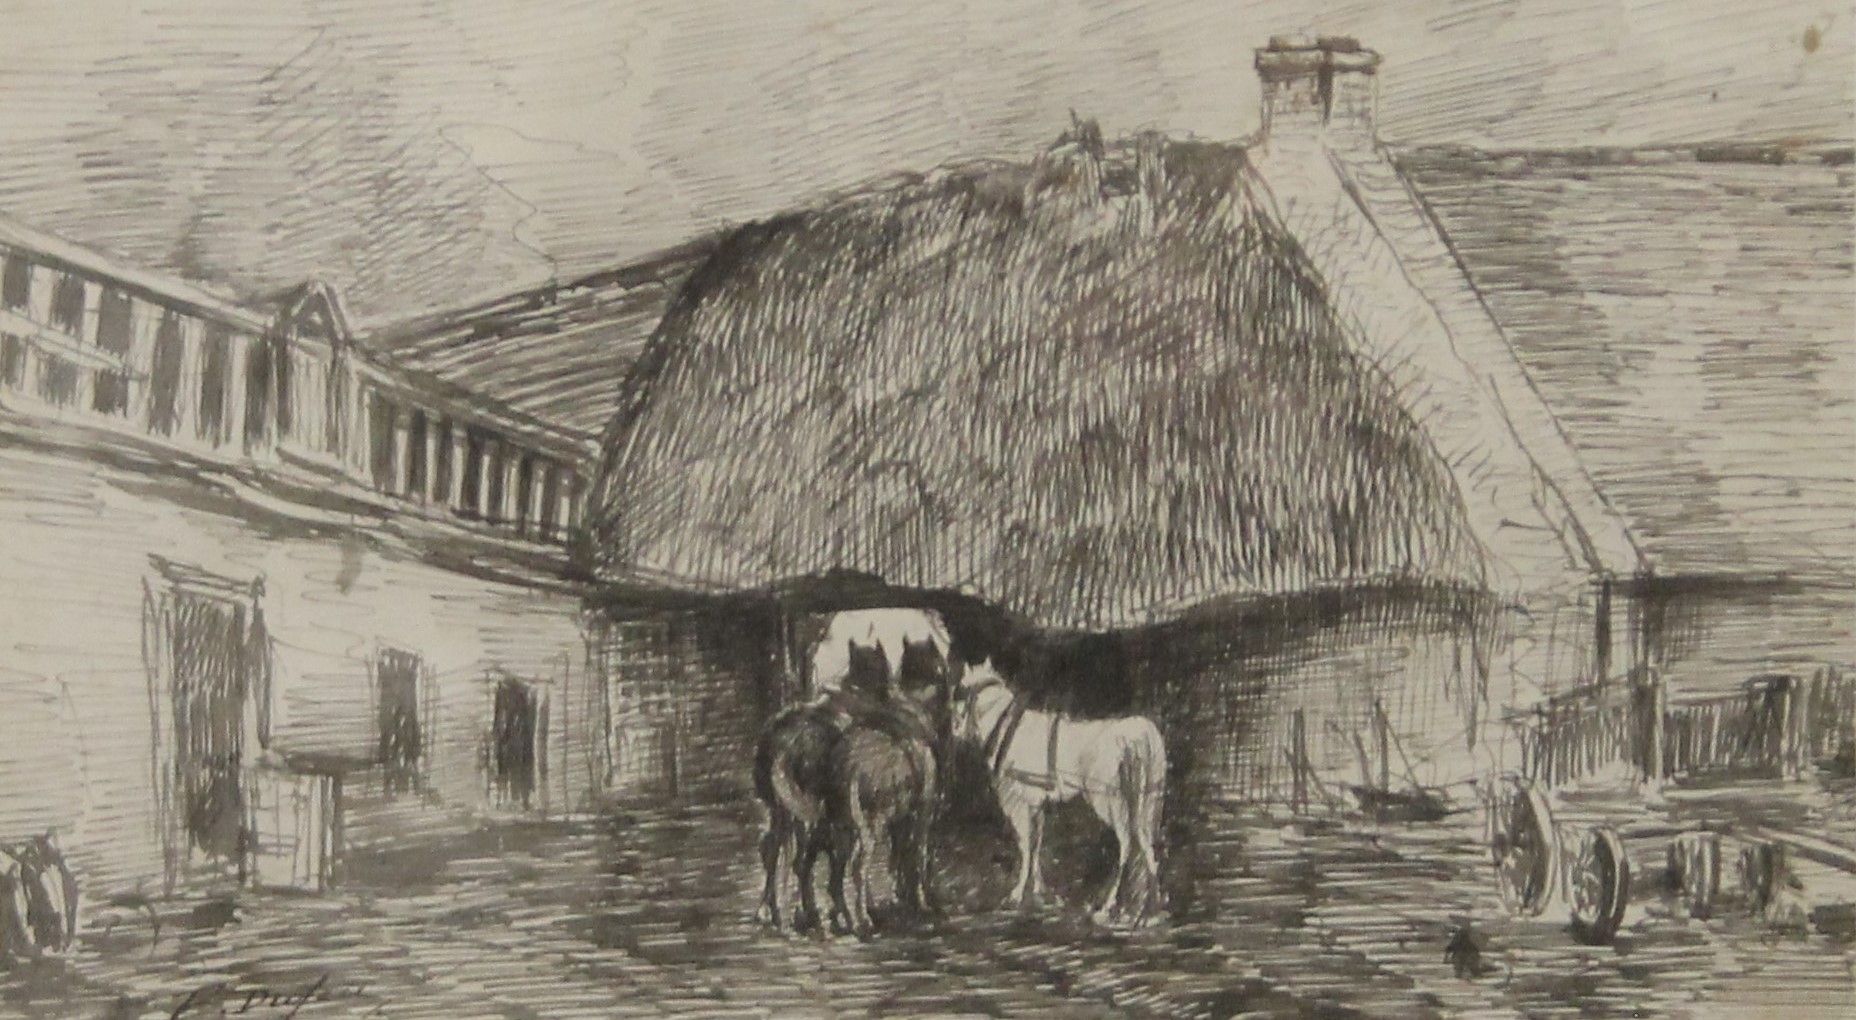 EDOUARD JACQUES DUFEU, Horses in Farmyard, pen and ink, framed and glazed. 27 x 15 cm.